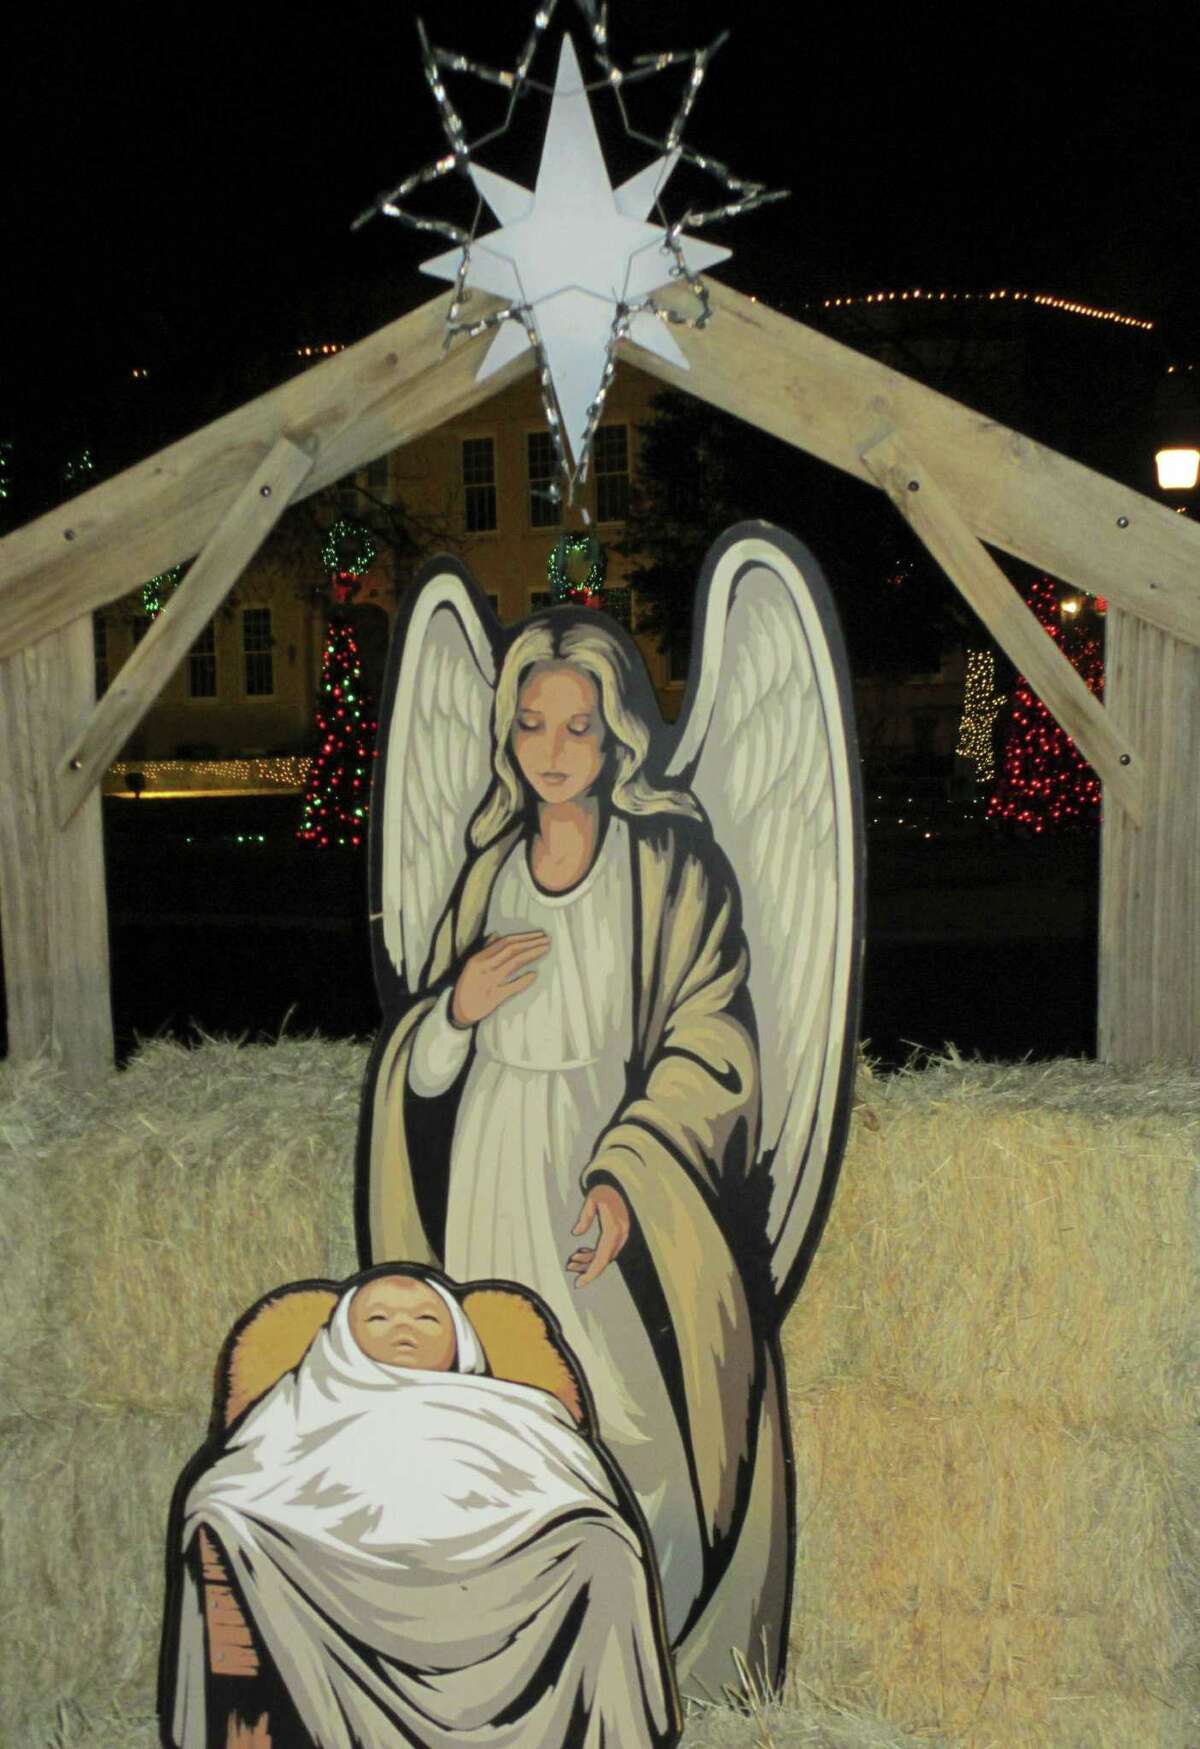 The manger scene on the Kerr County Courthouse Square is beautifully painted and illuminated with spotlights.